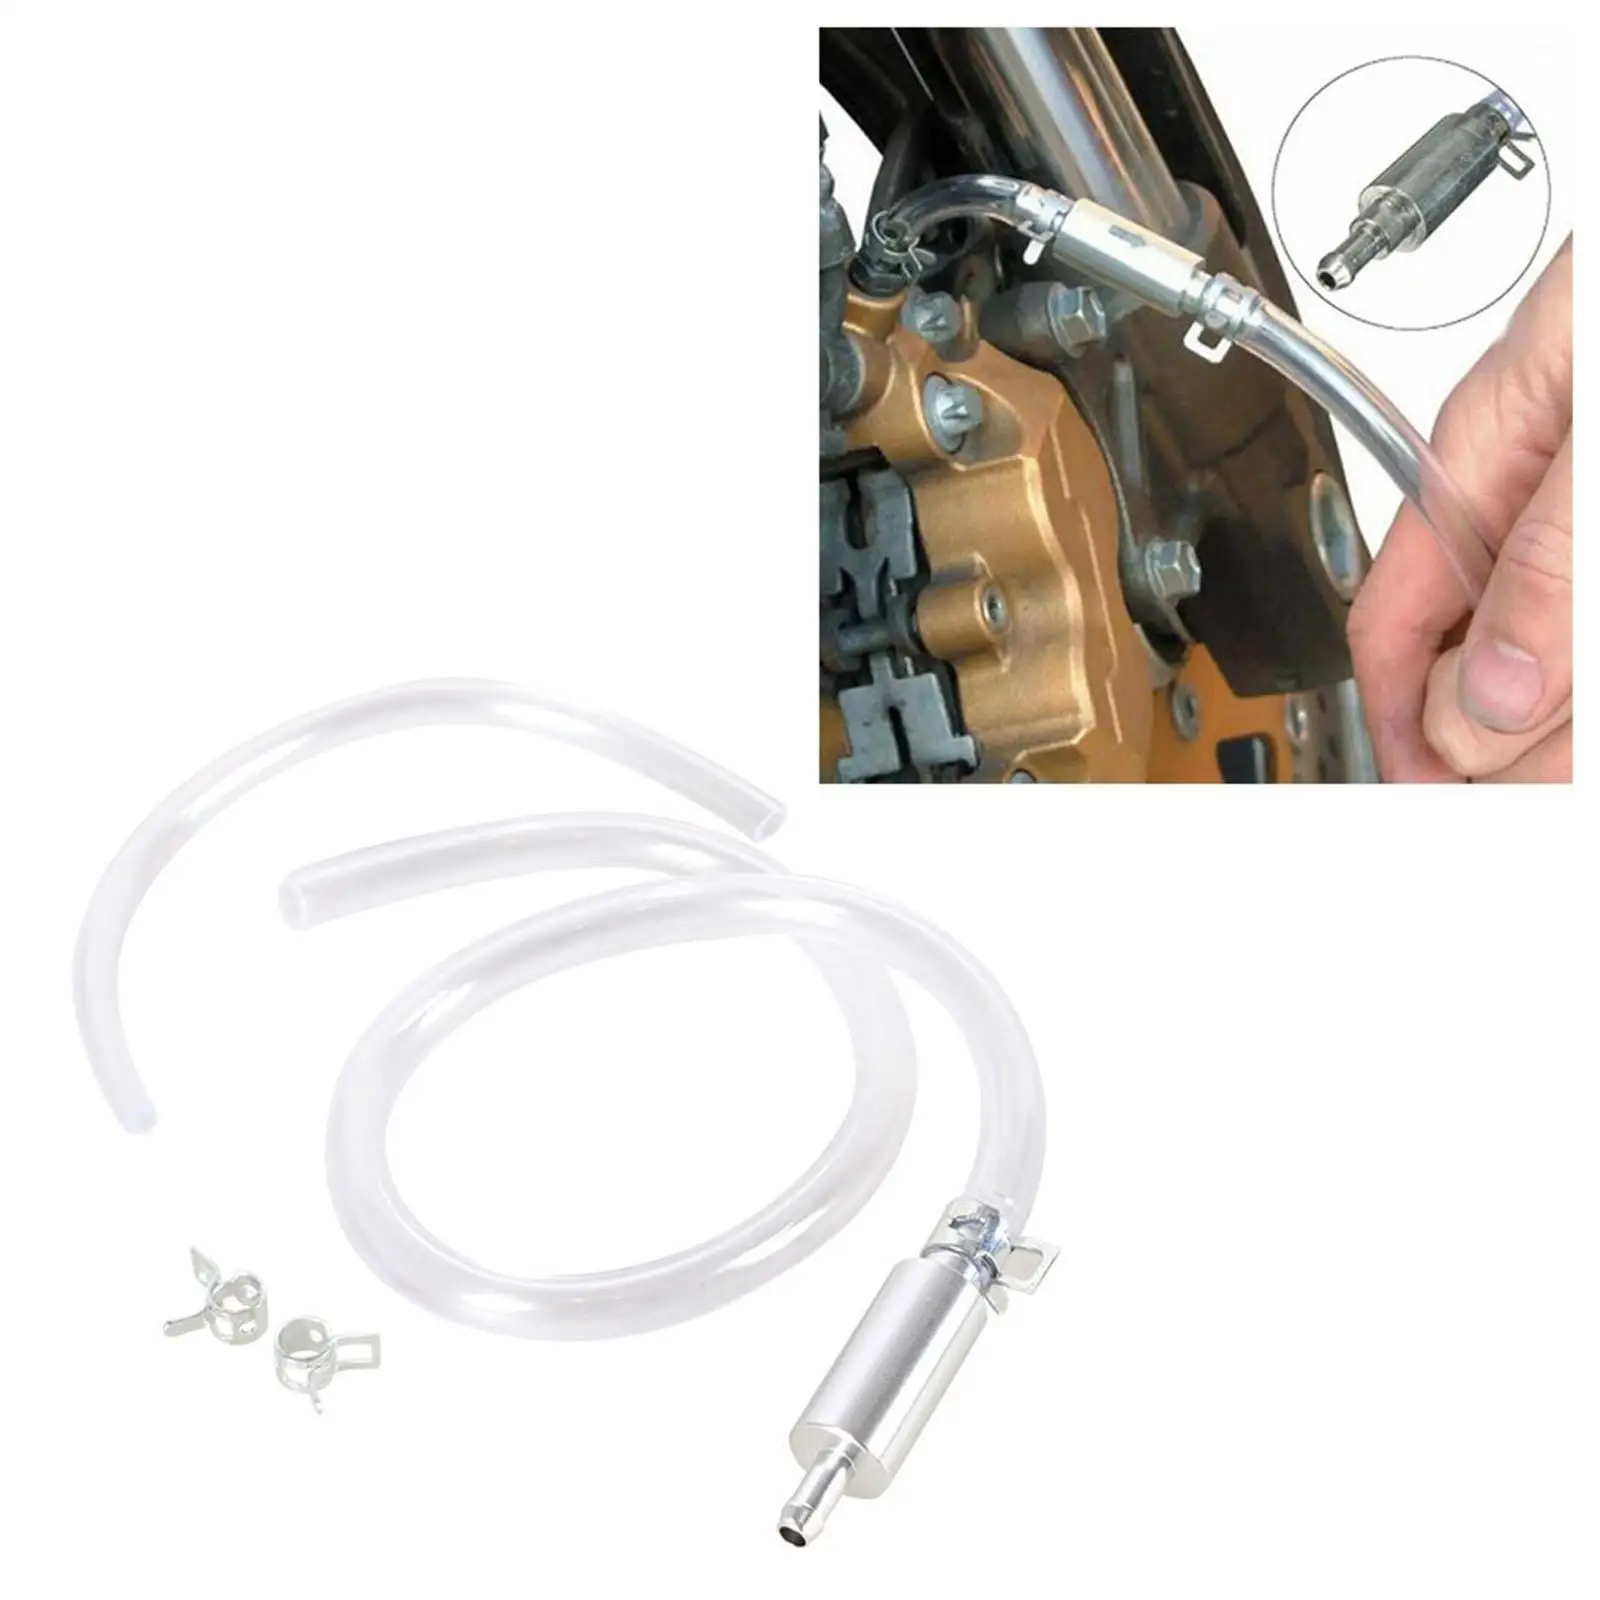 Brake System Power Bleeder with Soft Pipe for Most Motorcycle Clutch